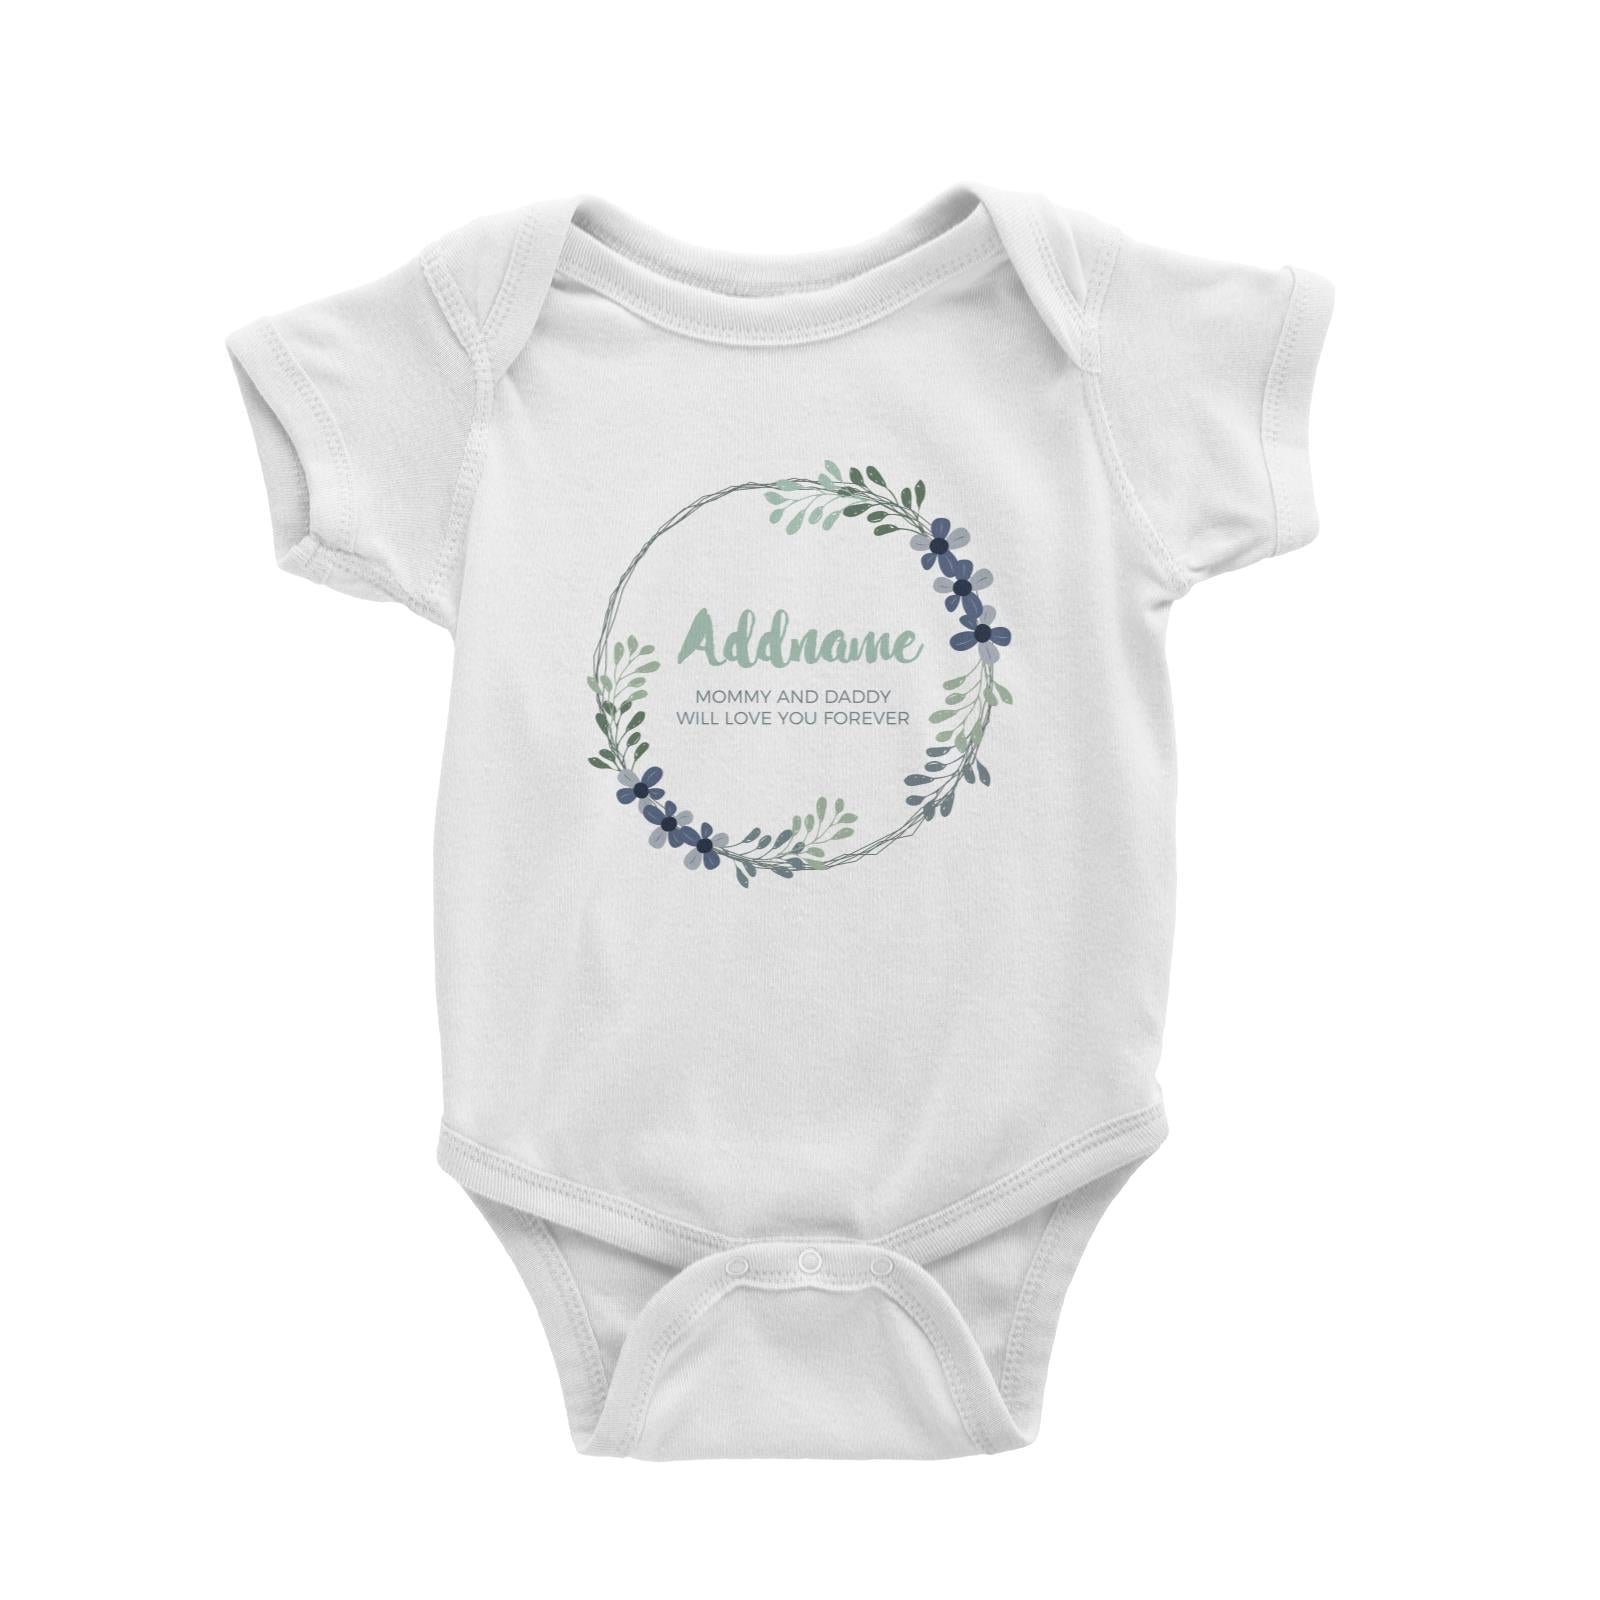 Dark Green and Navy Blue Wreath Personalizable with Name and Text Baby Romper